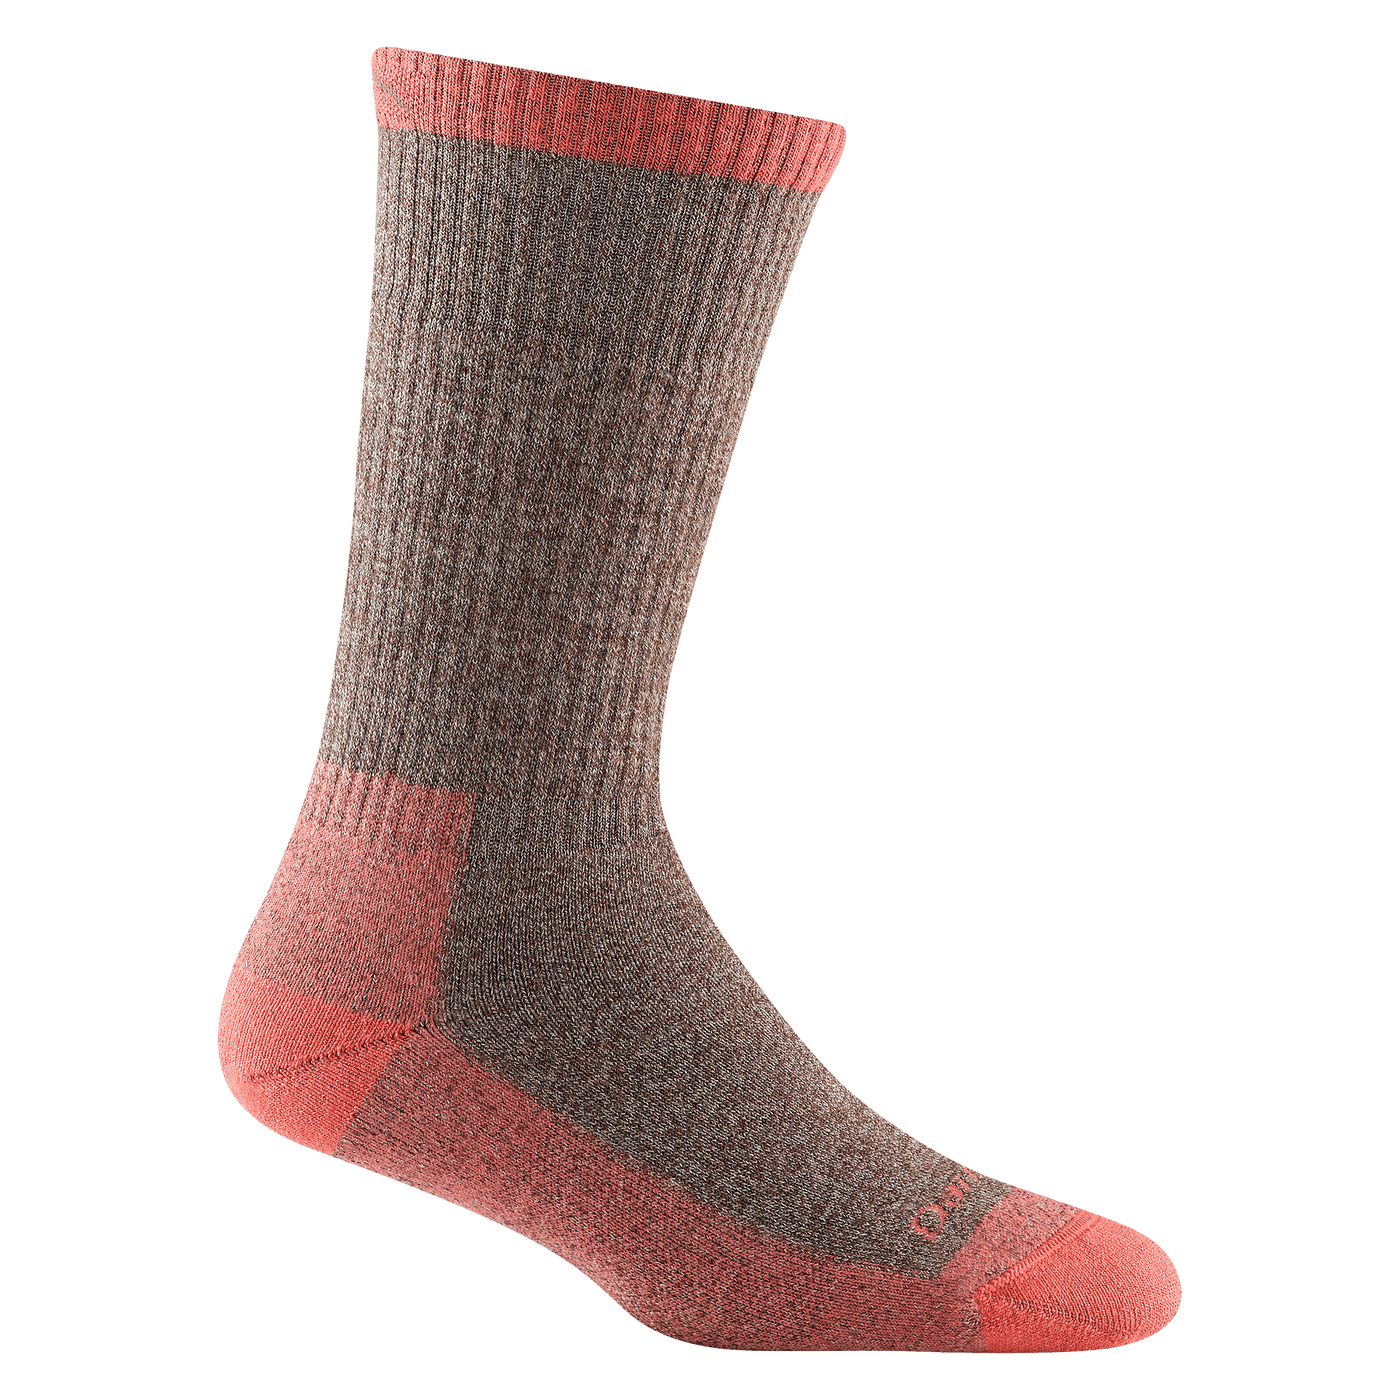 Nomad, Women's Midweight Boot Sock with Full Cushion #1984 - Darn Tough - The Sock Monster